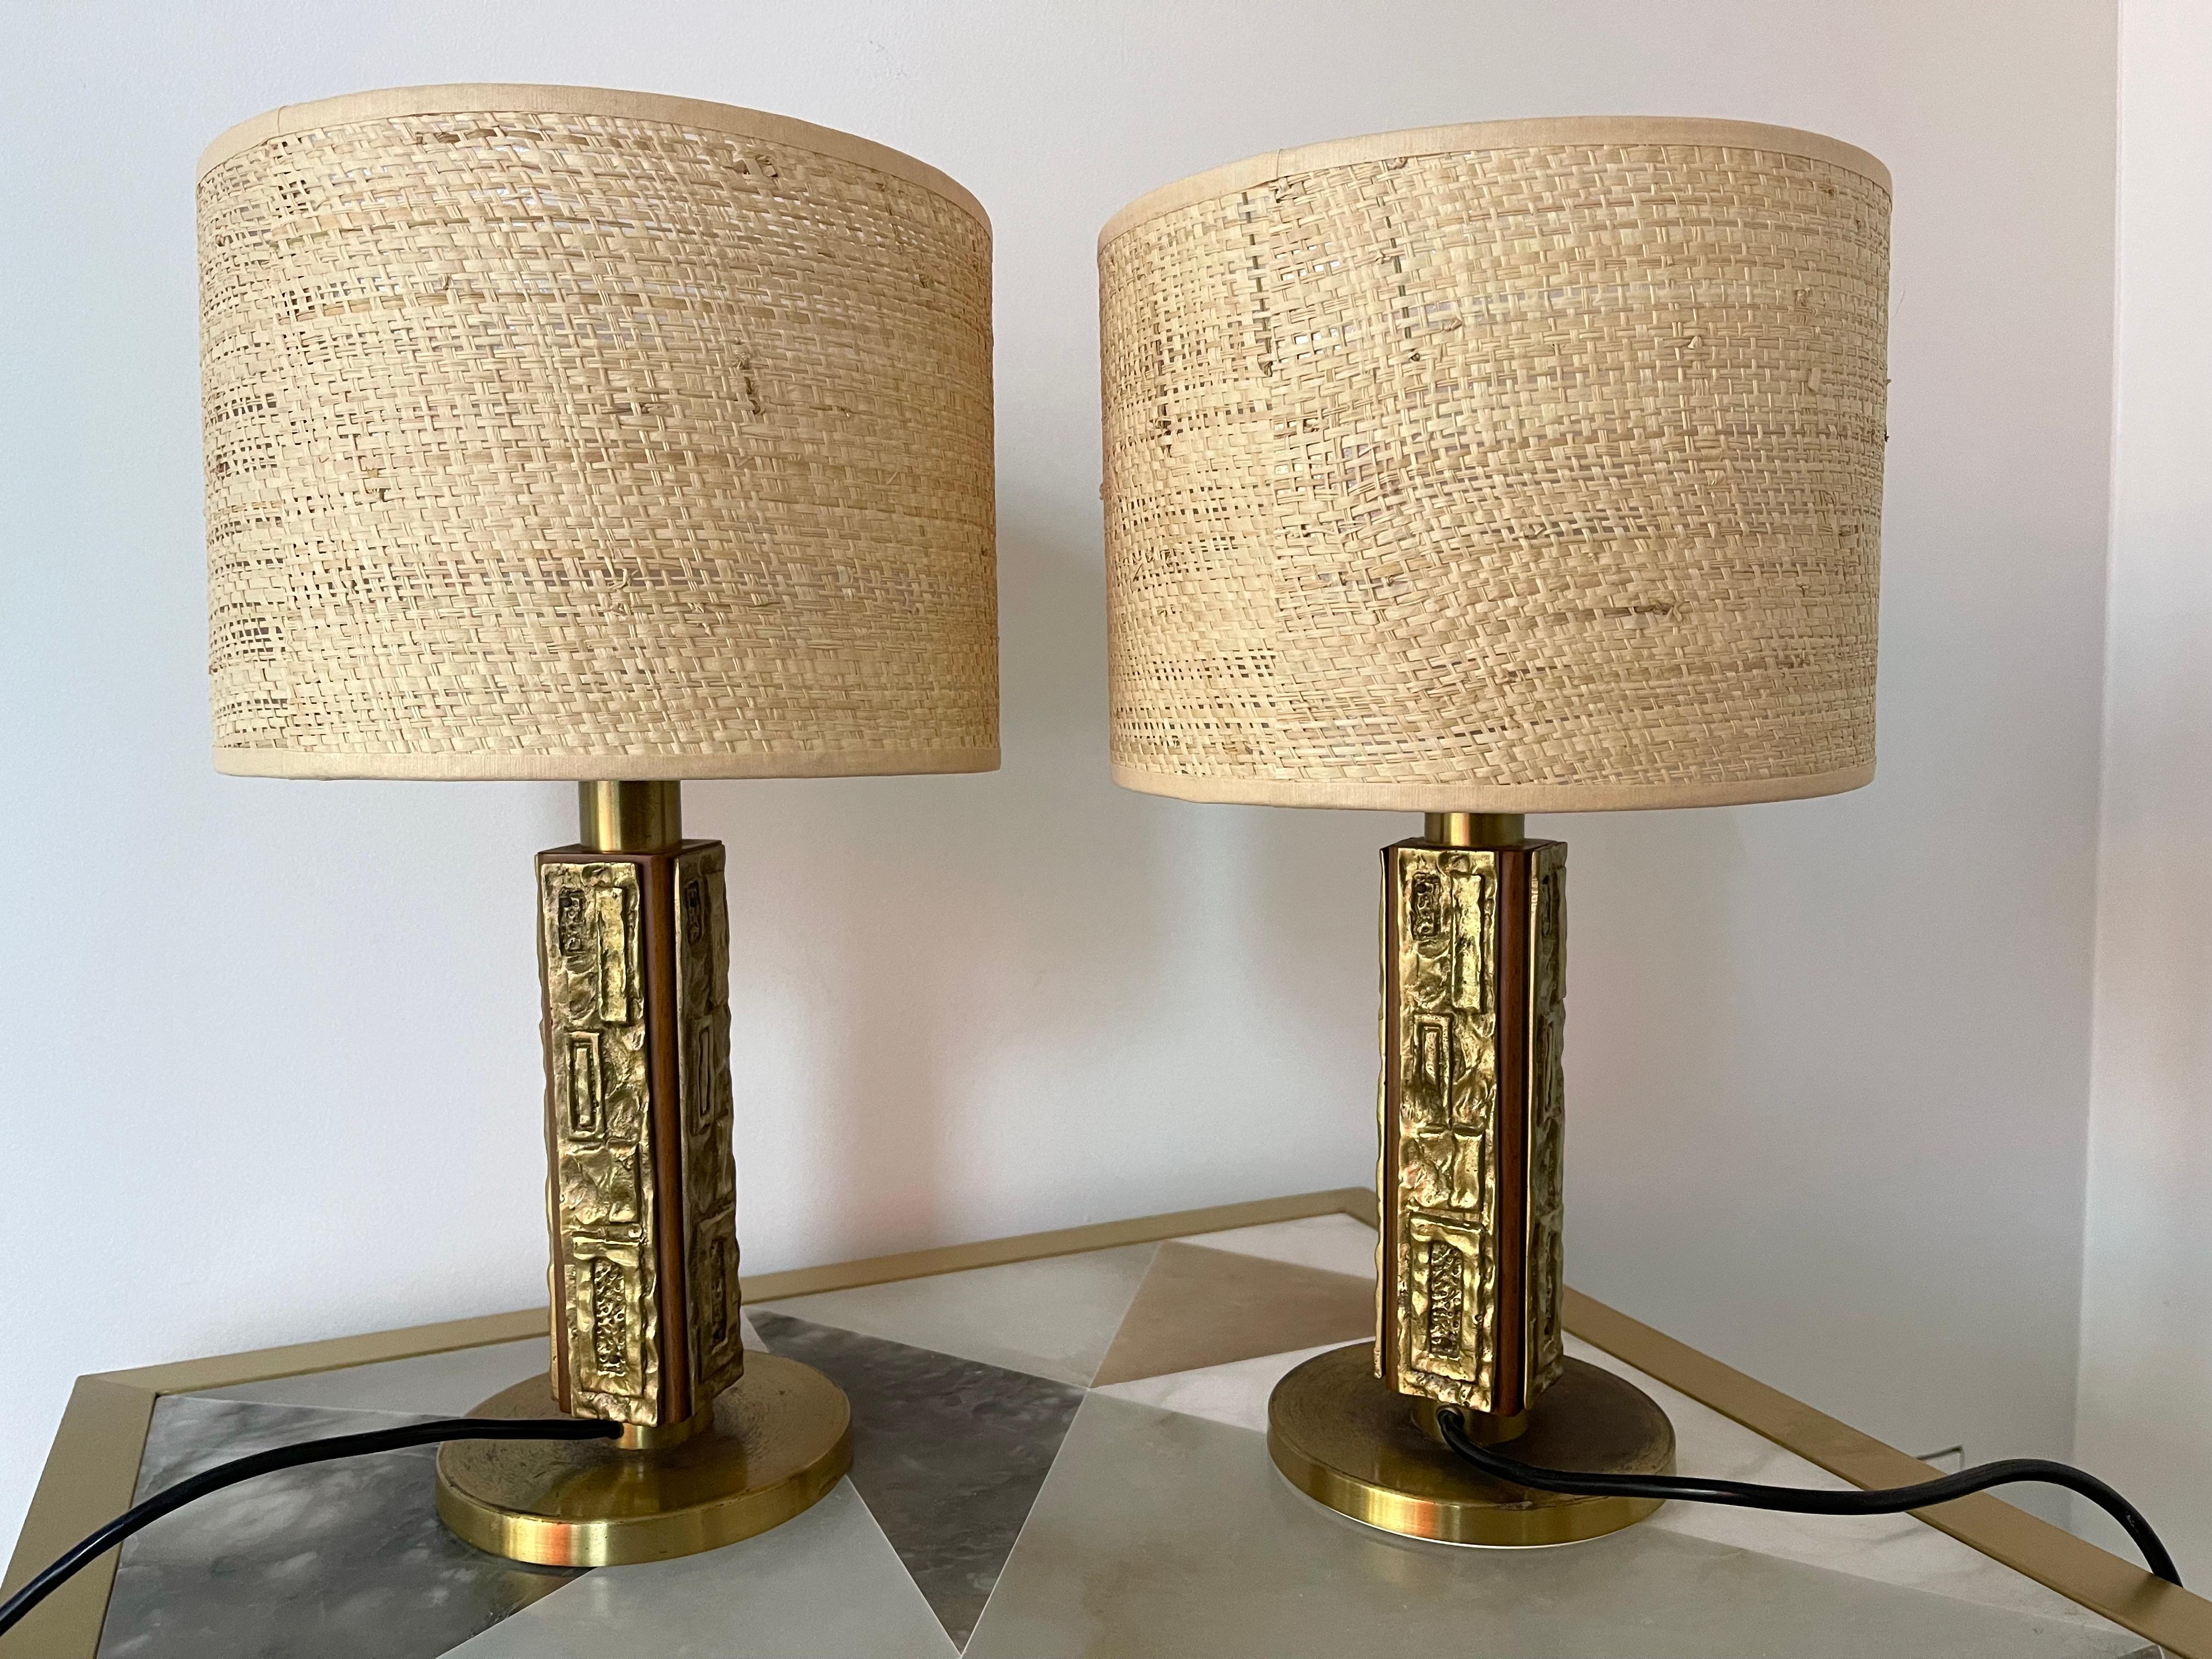 Pair of Brass and Wood Sculpture Lamps by Angelo Brotto for Esperia Italy, 1970s For Sale 3